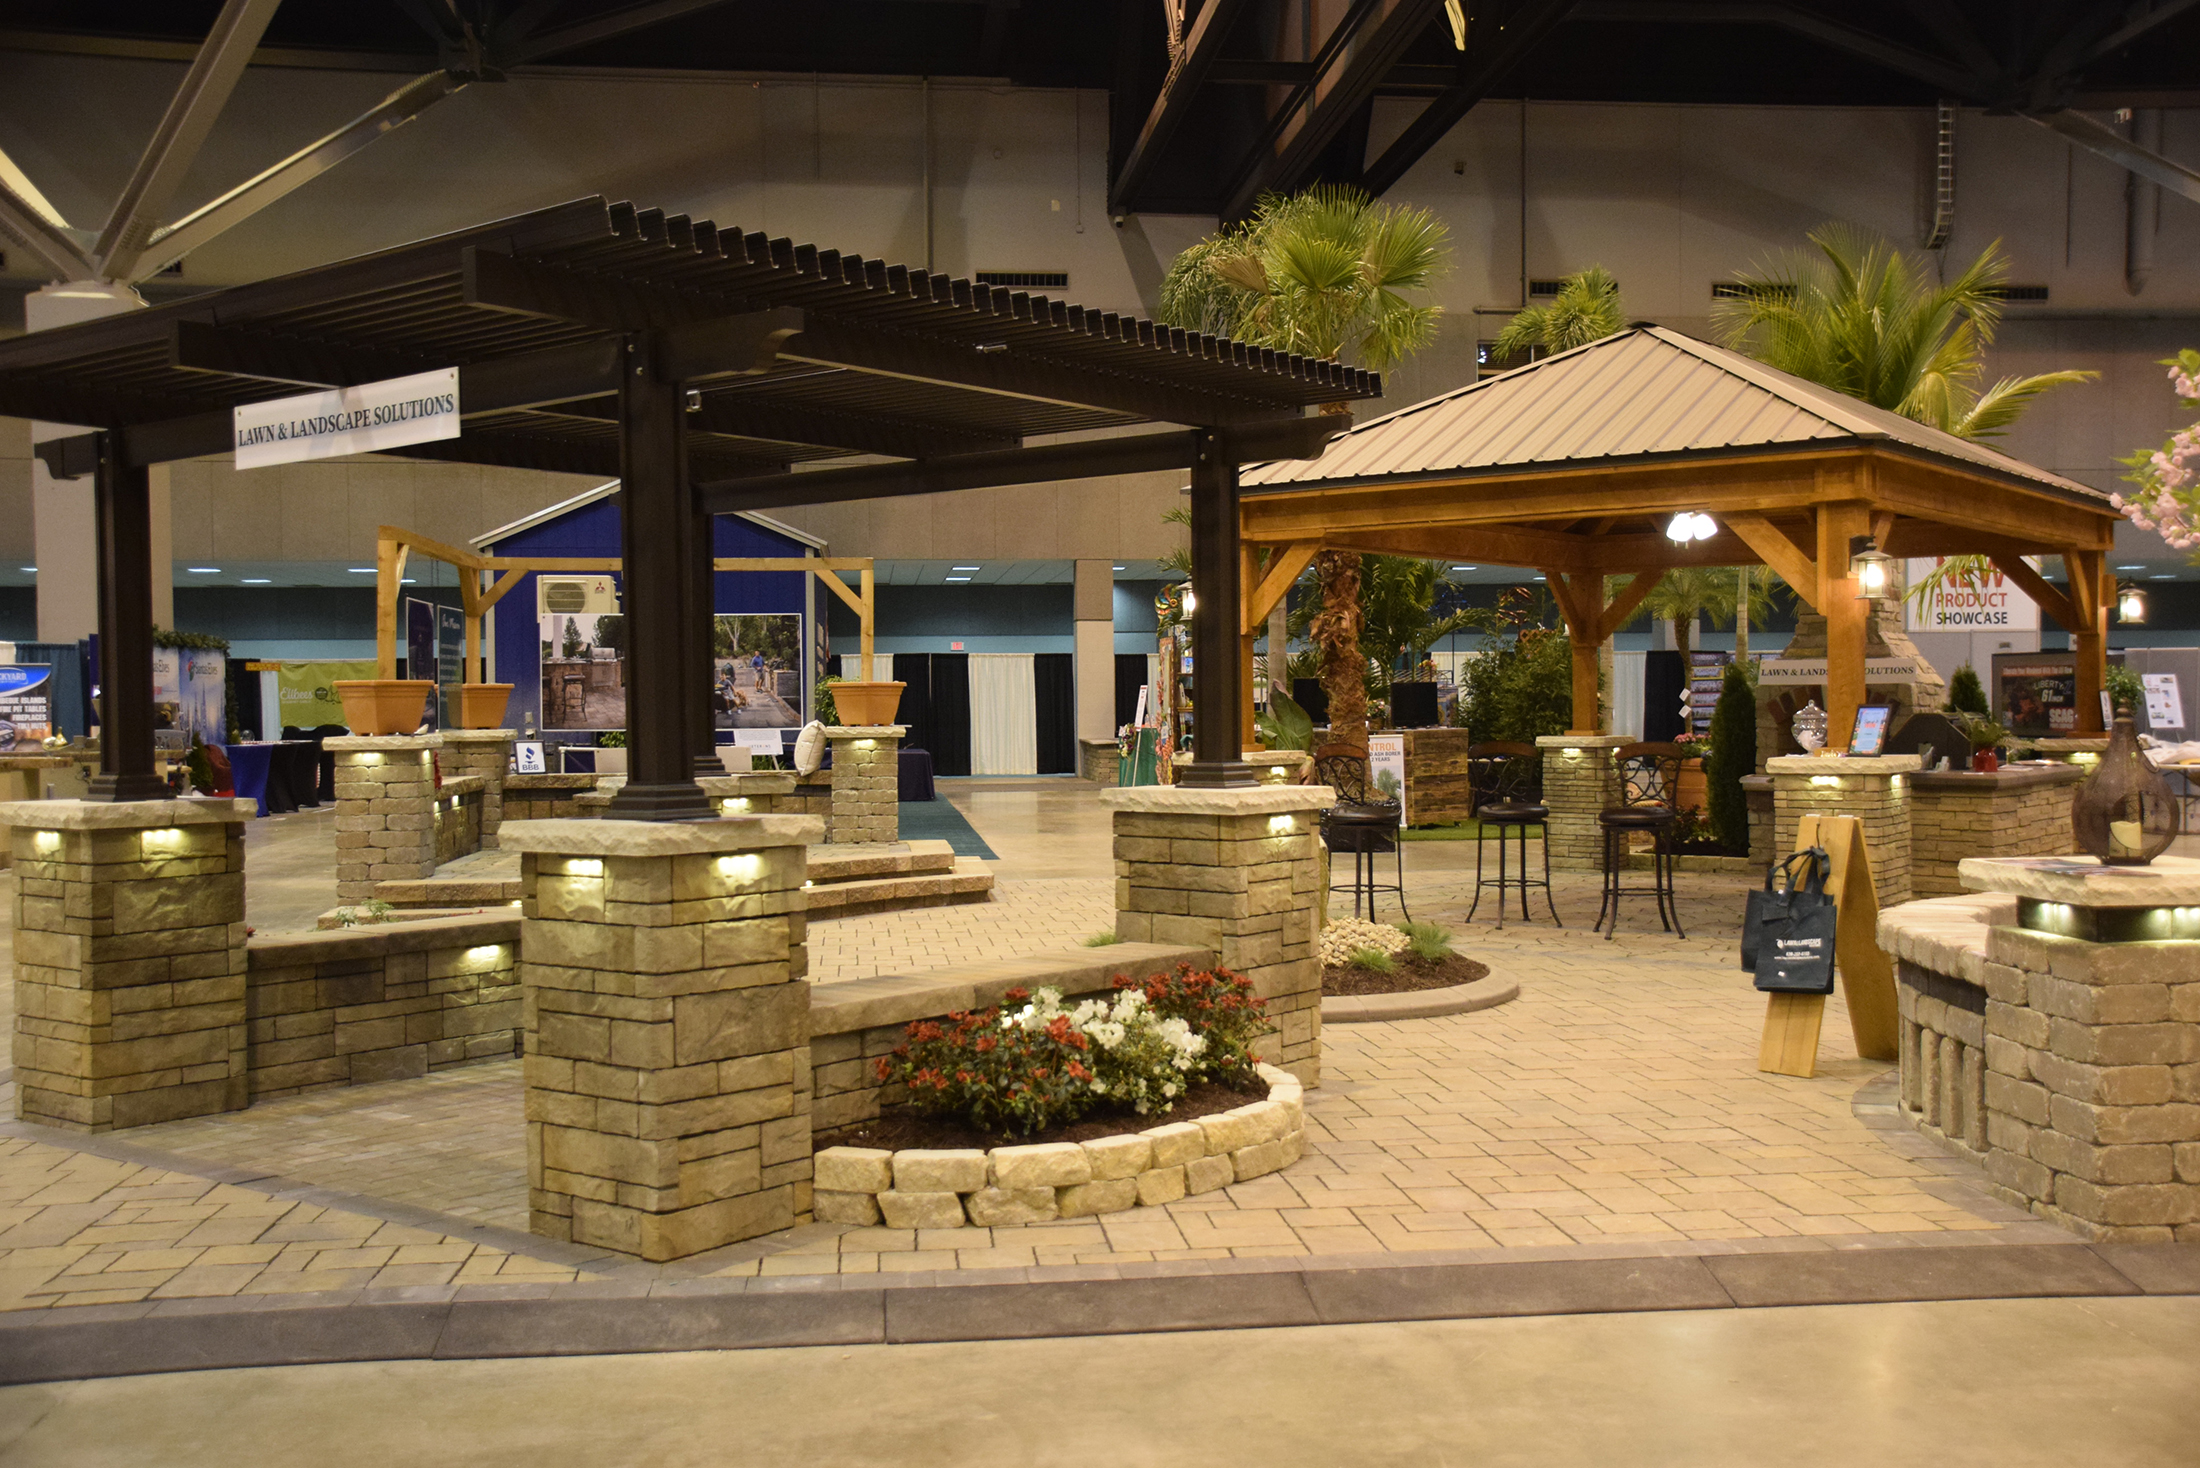 Outdoor Imagination! at the Home & Garden Show